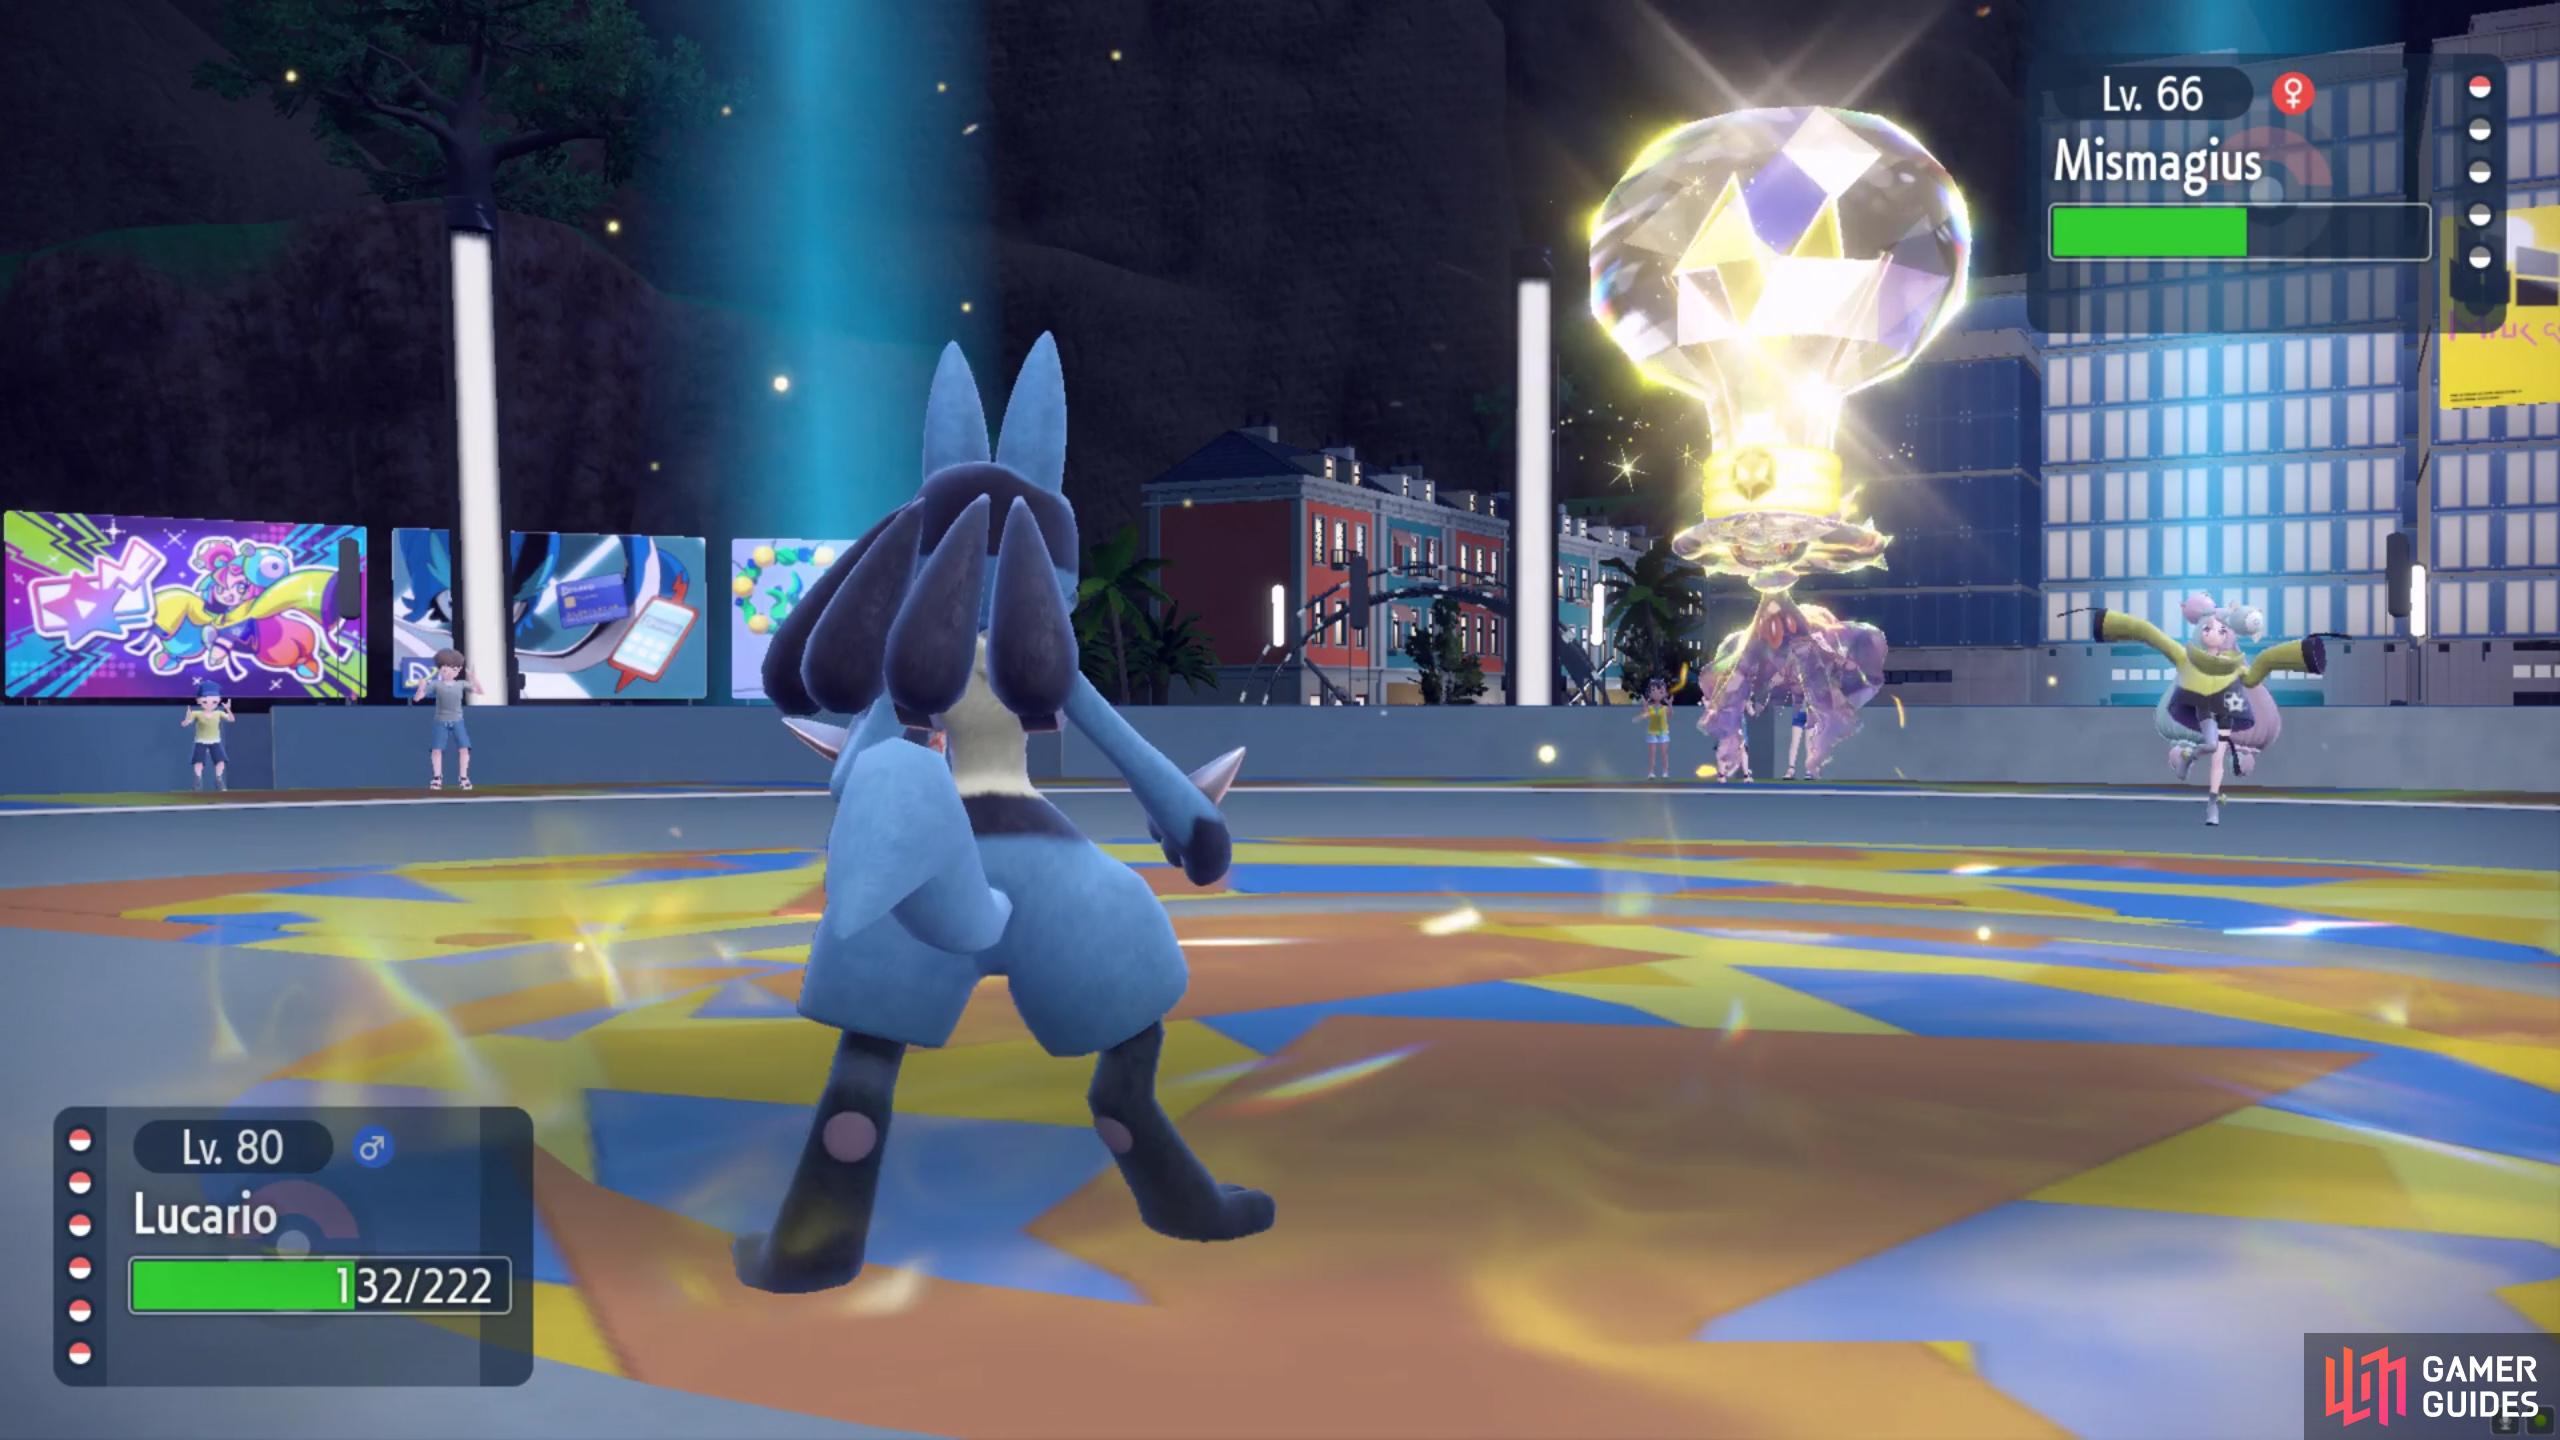 Lucario isn’t the best choice here, but if it’s high Level enough, it could work.